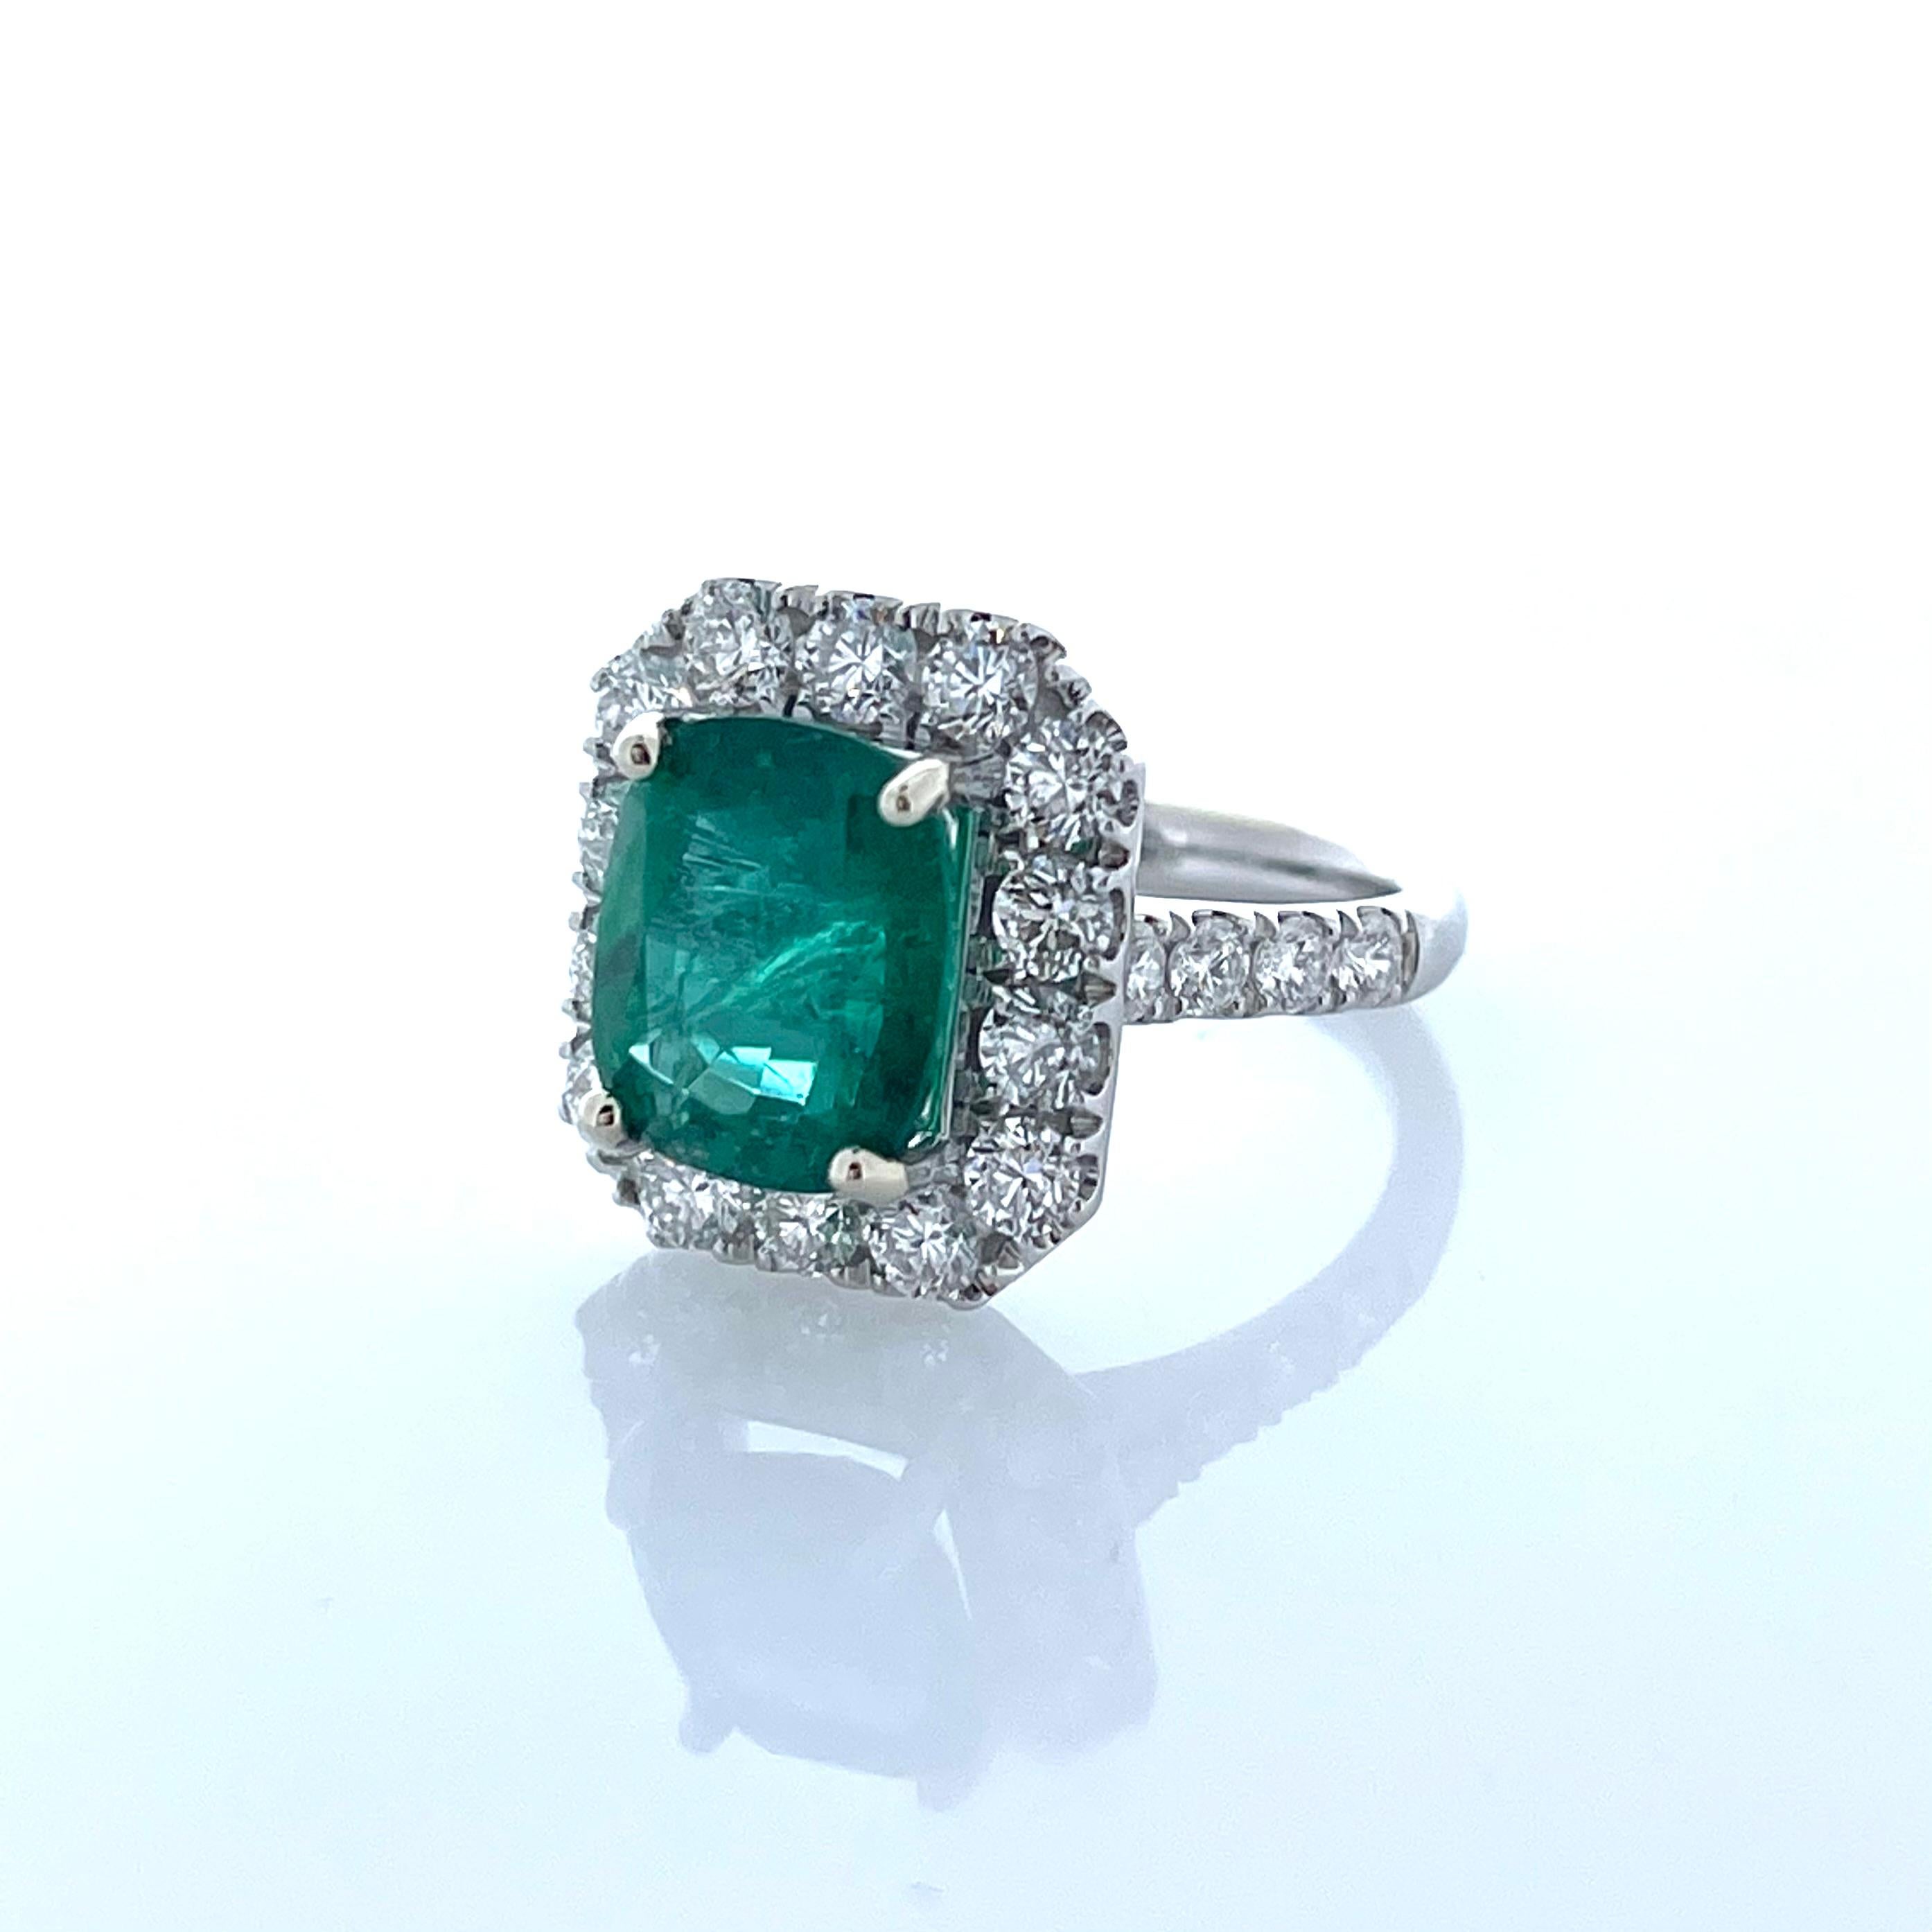 This stunning piece features a emerald cushion cut 3.94 carats emerald, Would you look at this beauty! Simple in design, but there is nothing ordinary about the gorgeous color of this breathtaking green emerald ring. The 1.86 carat total weight of